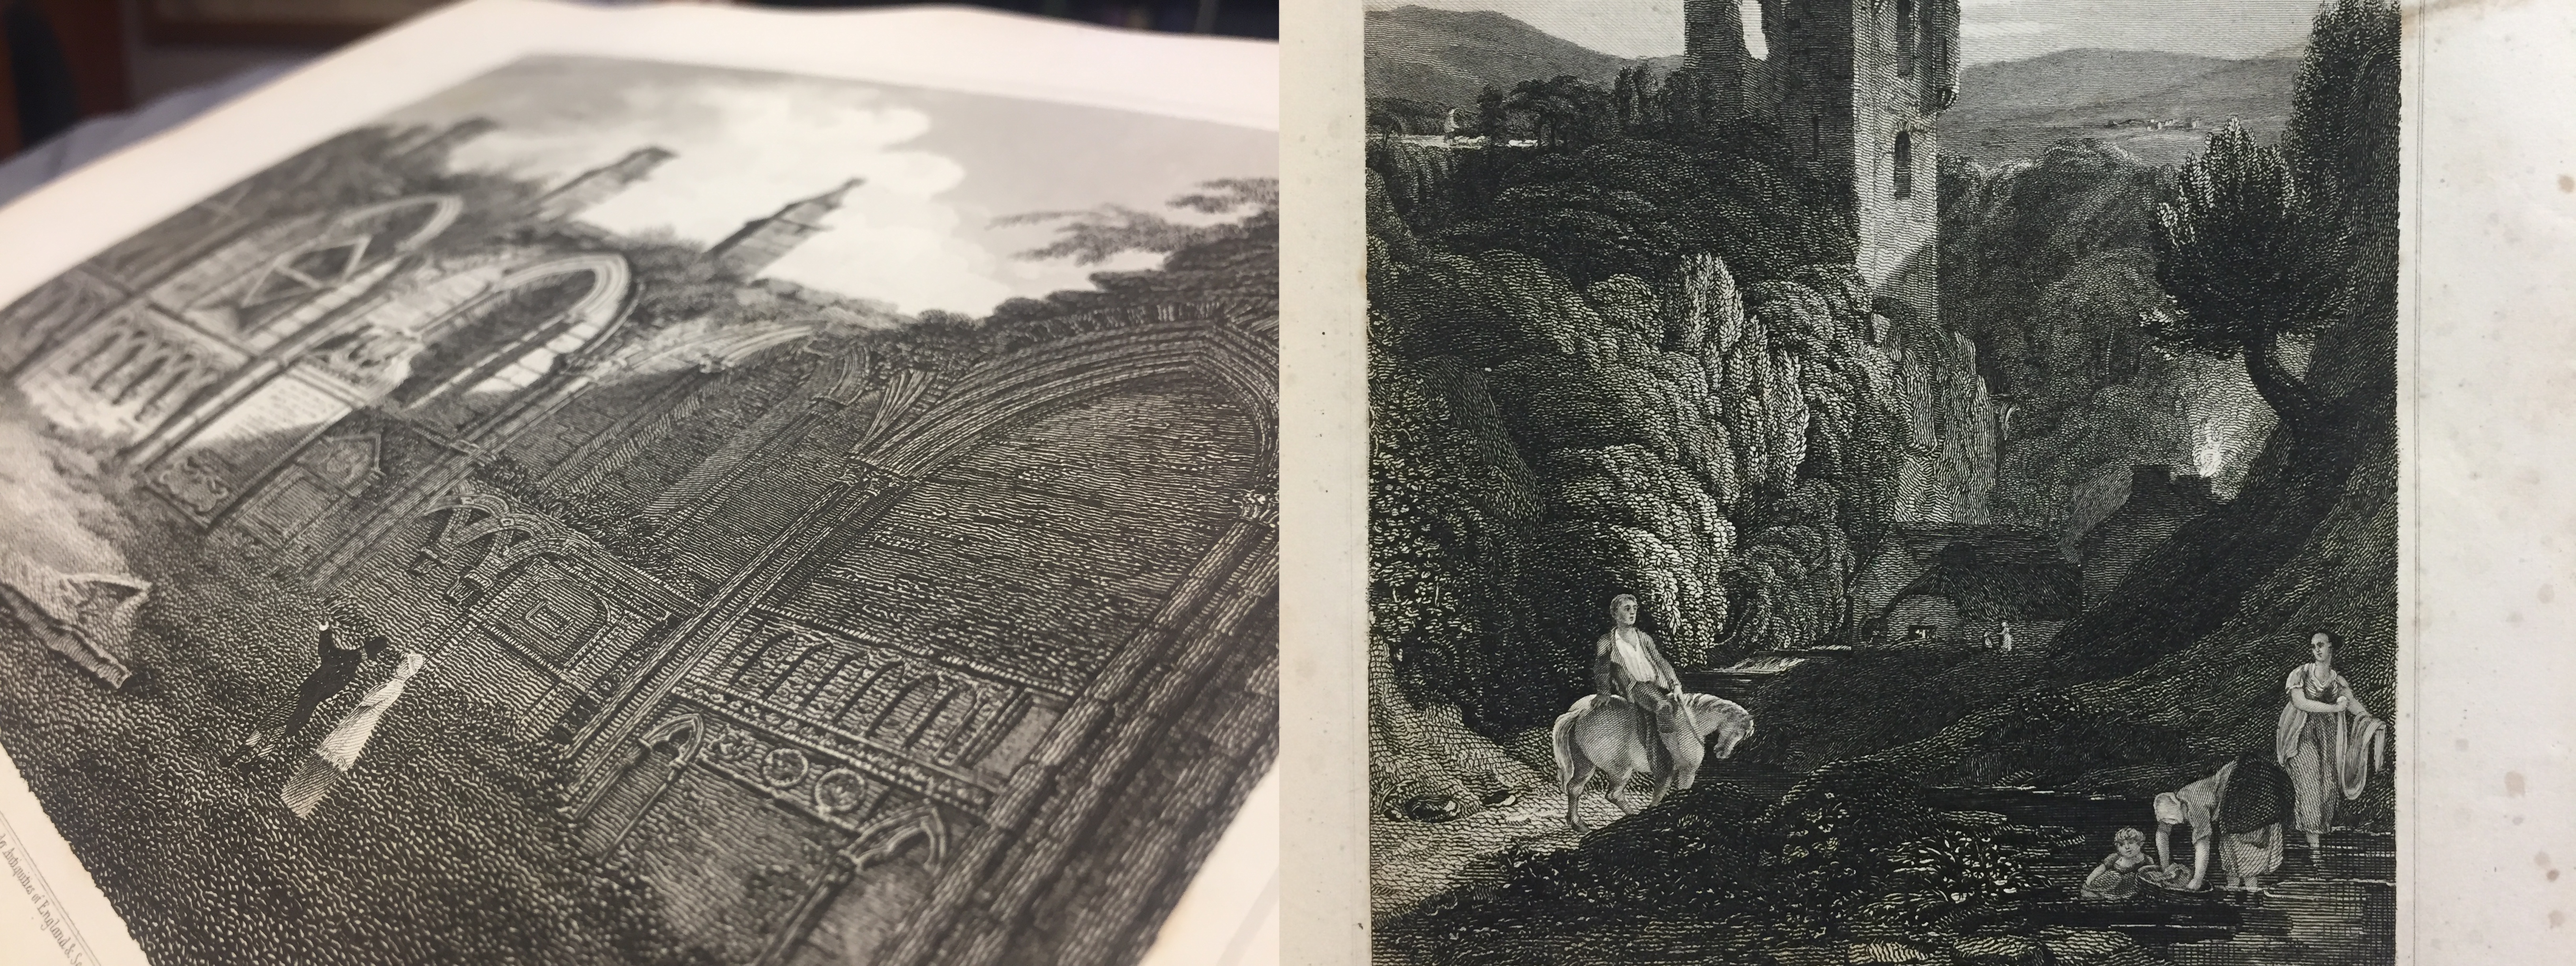 "Images from The Border Antiquities of England and Scotland "